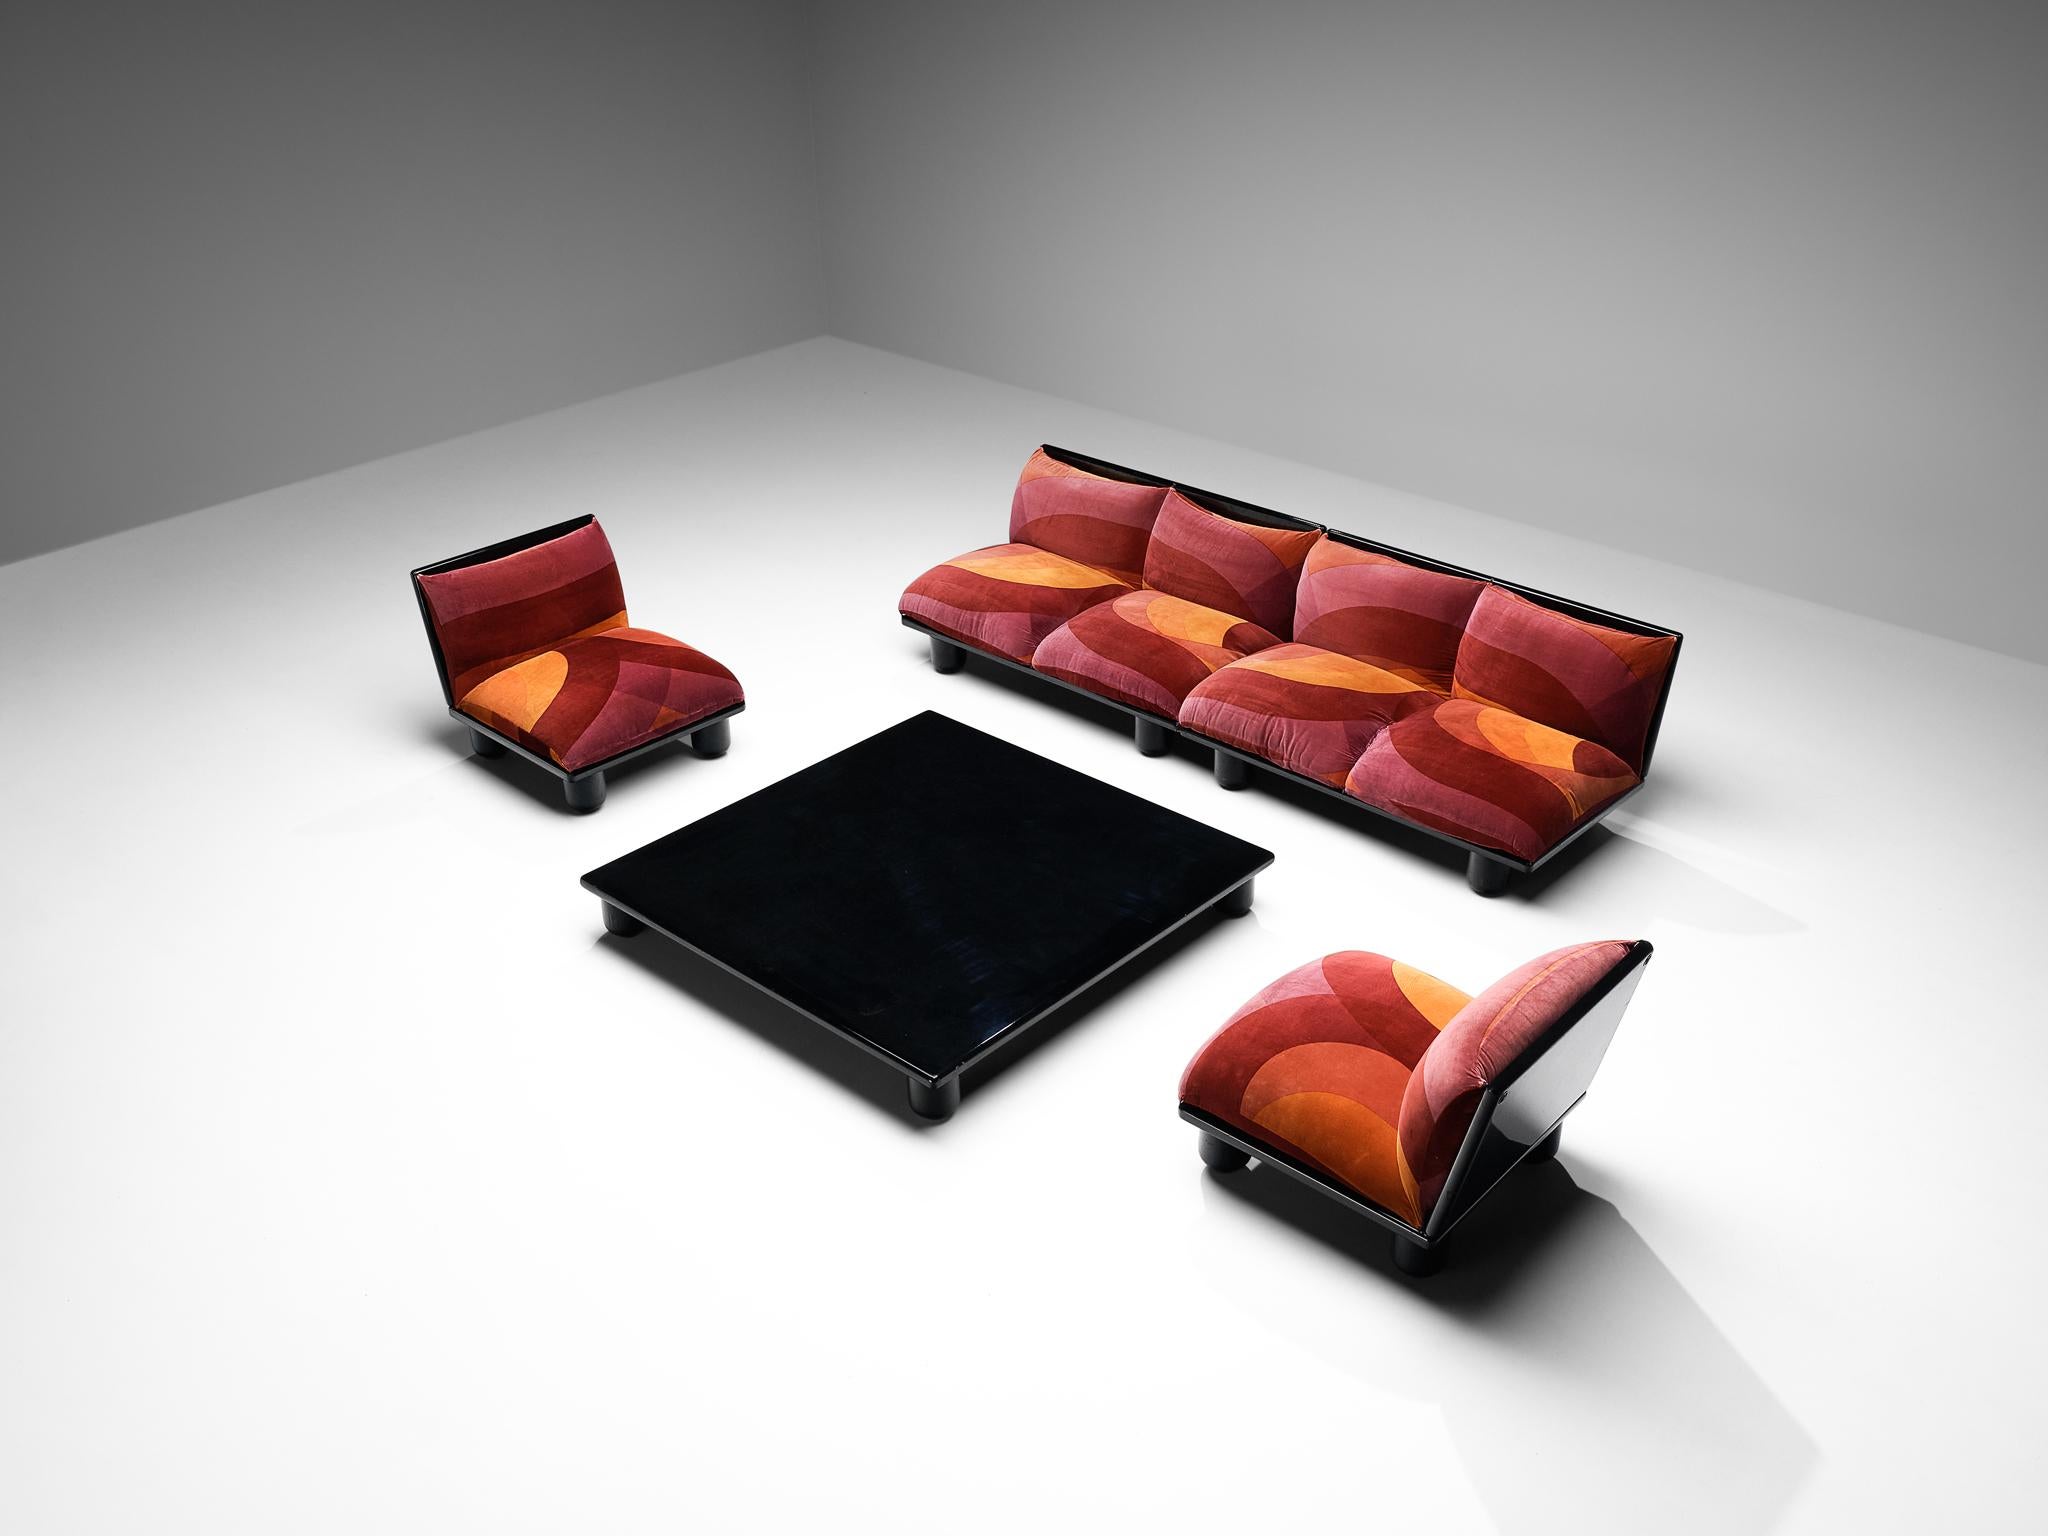 Carlo Bartoli for Rossi di Albizzate, pair of two-seat sofa with pair of lounge chairs and coffee table, model 'Blop', original velvet, lacquered wood, Italy, 1972

A postmodern design by Italian master of architecture and design Carlo Bartoli